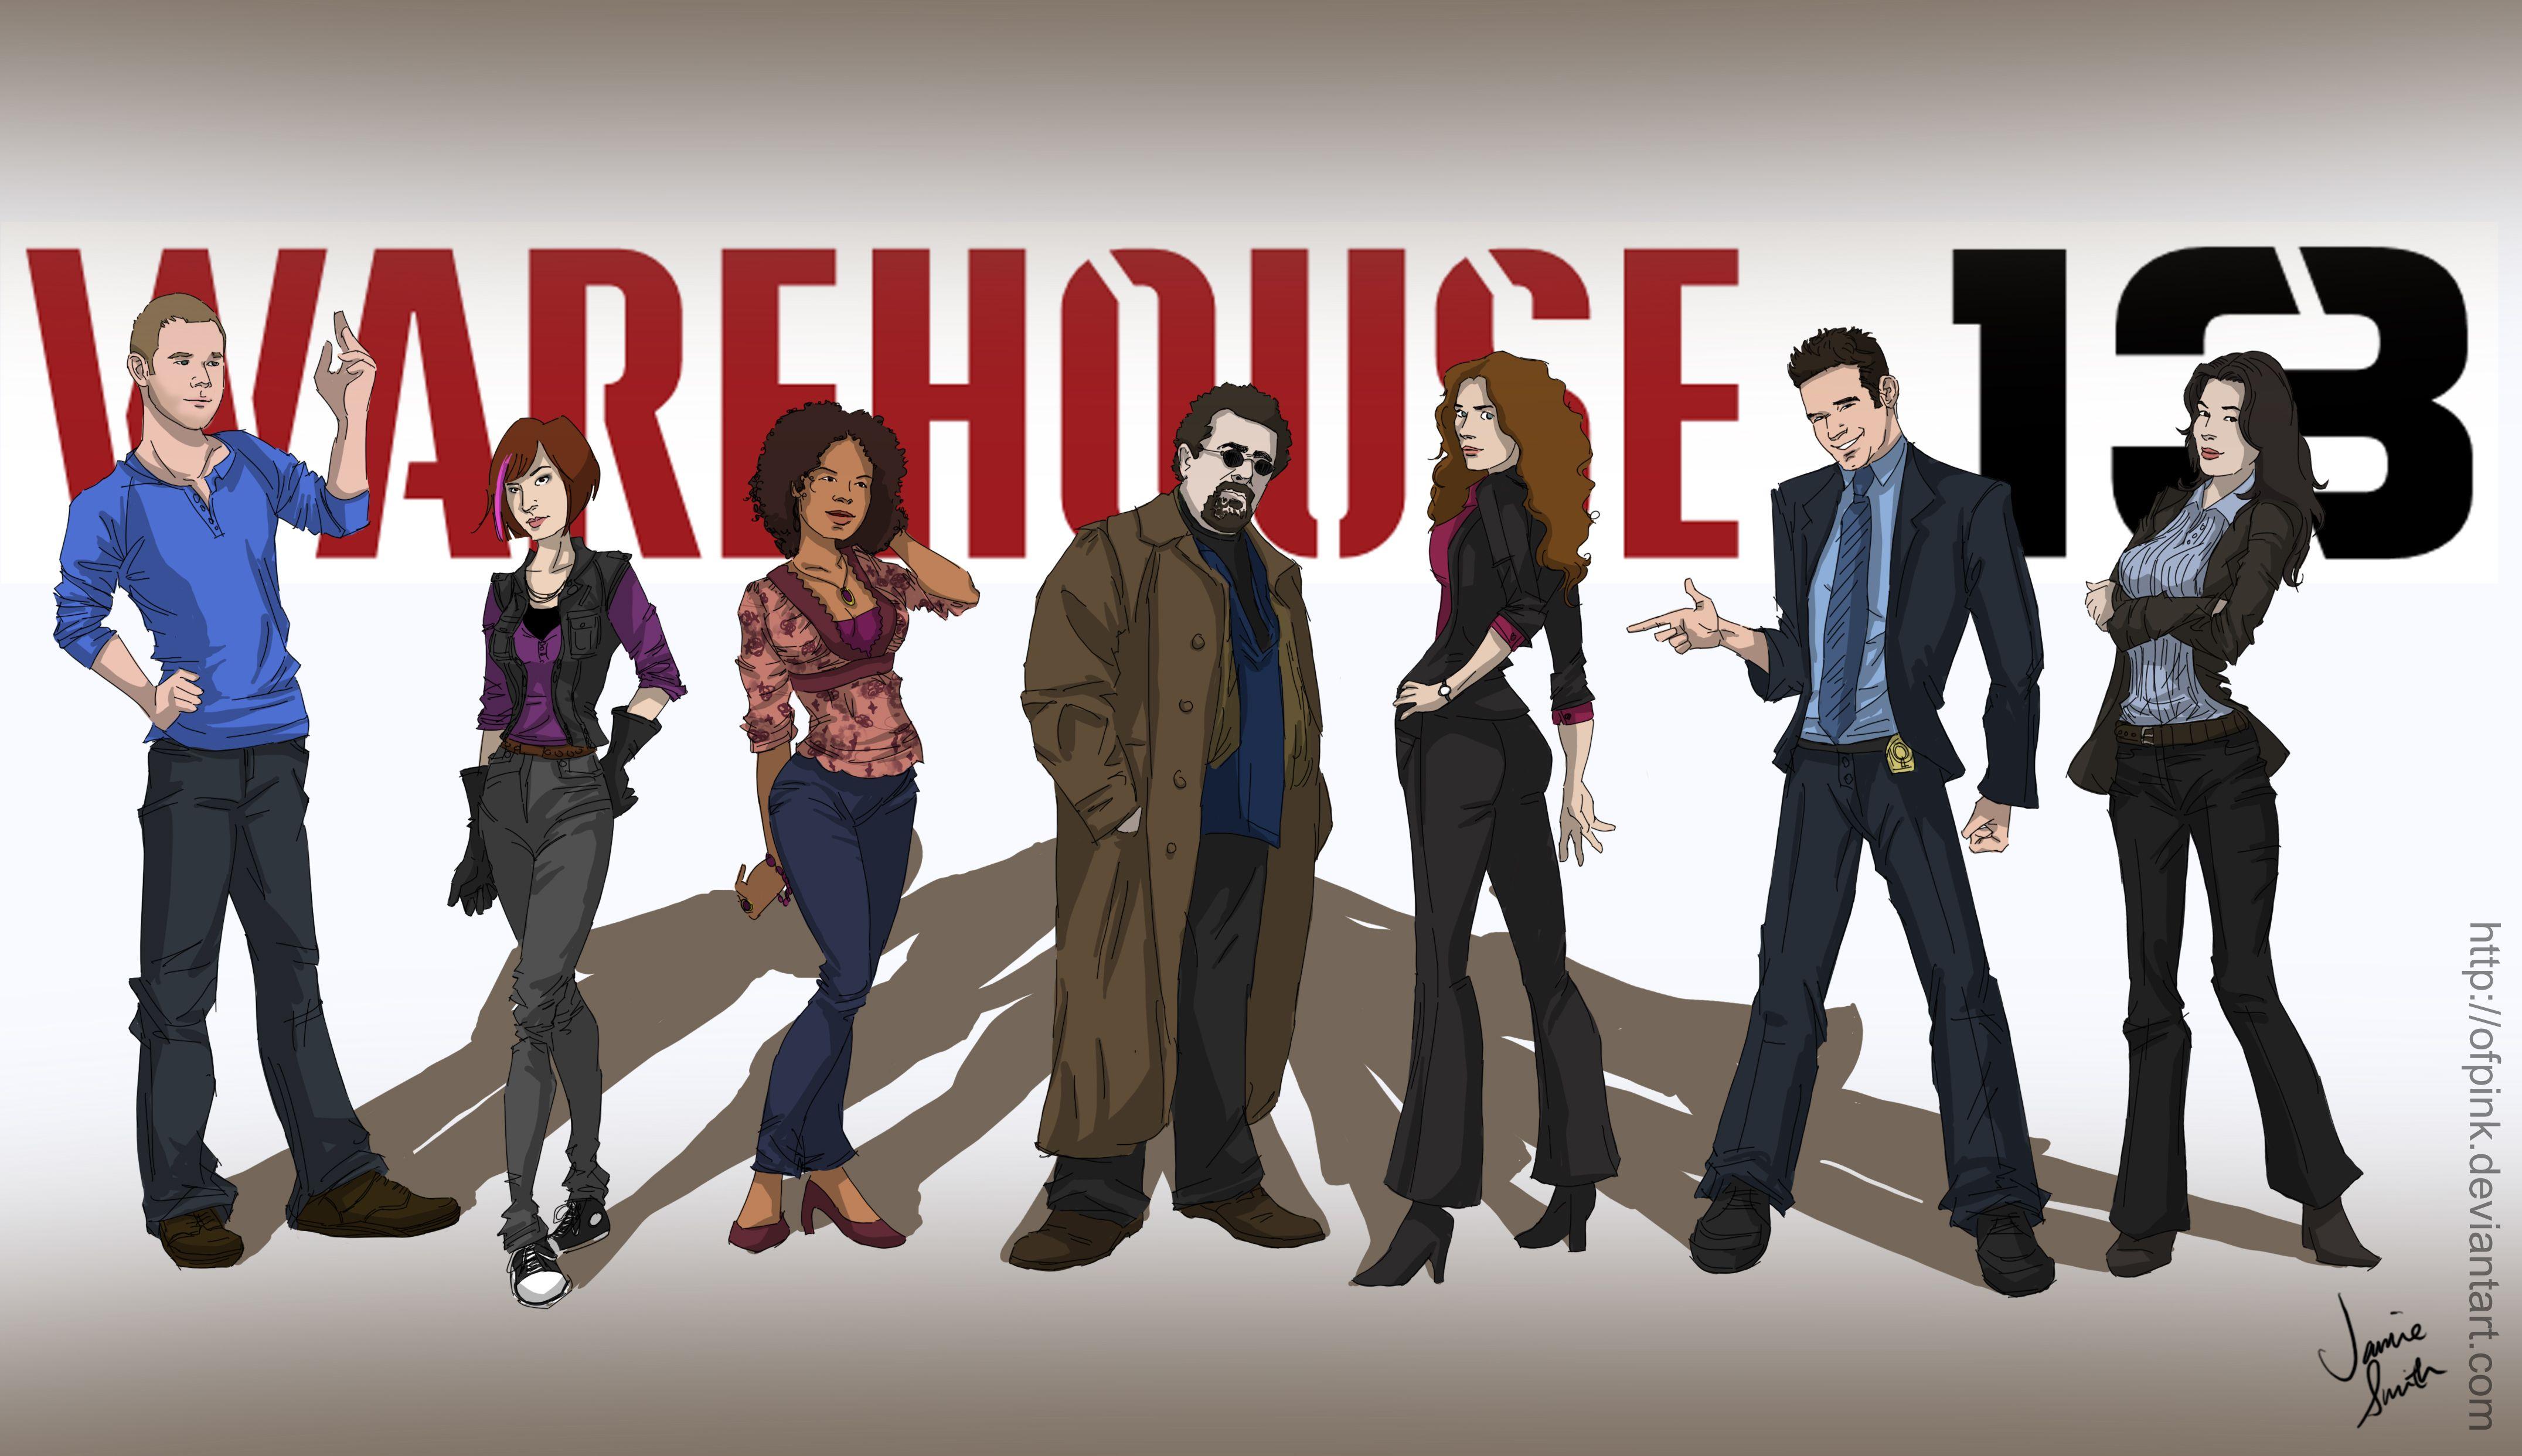 Warehouse 13 Wallpapers Top Free Warehouse 13 Backgrounds Wallpaperaccess